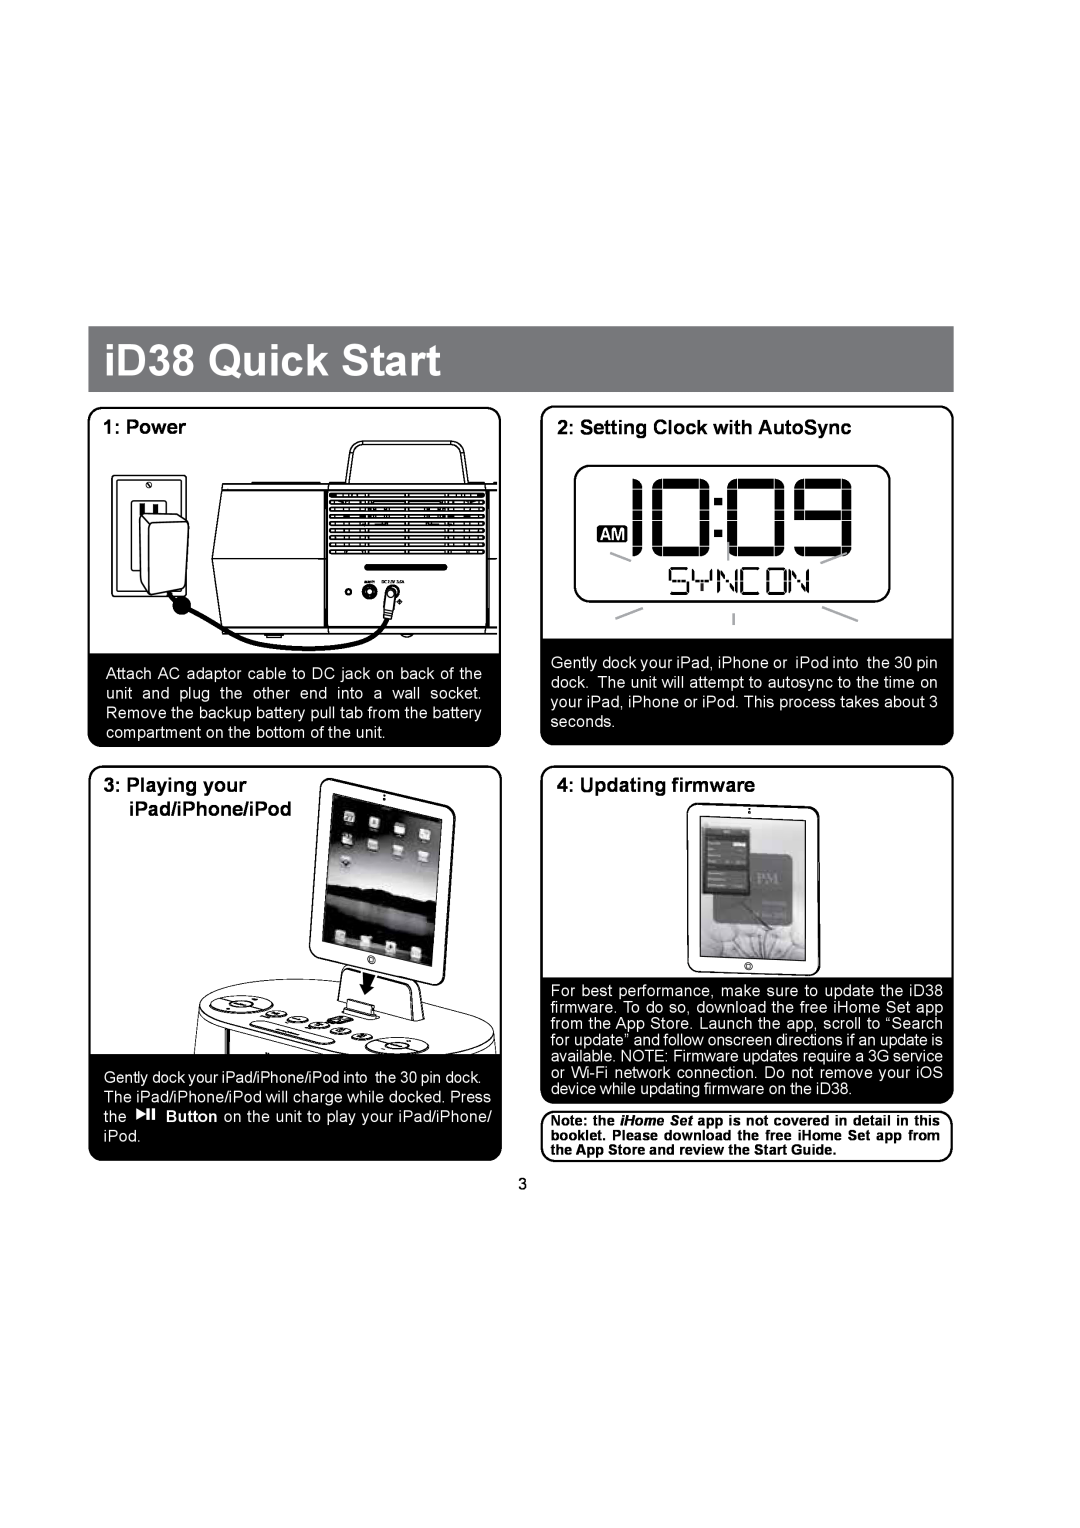 iHome ihome iD38 Quick Start, Power, Setting Clock with AutoSync, Playing your, Updating firmware, iPad/iPhone/iPod 